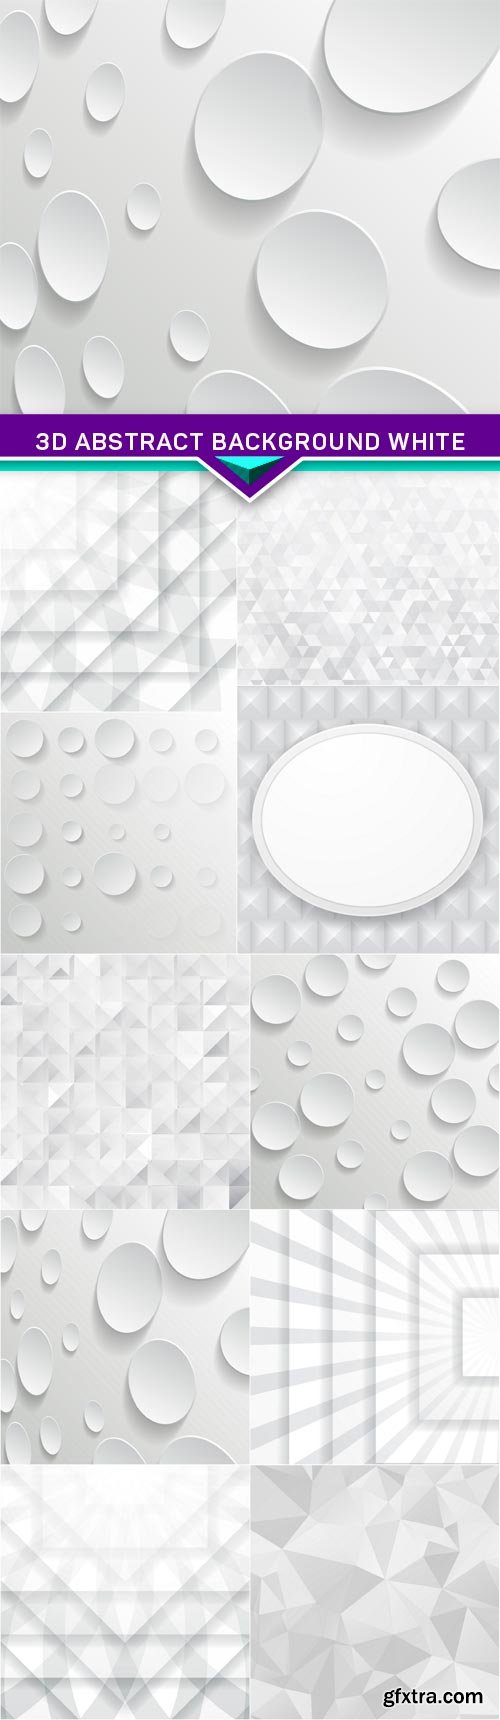 3d abstract background white Part 4 10x EPS